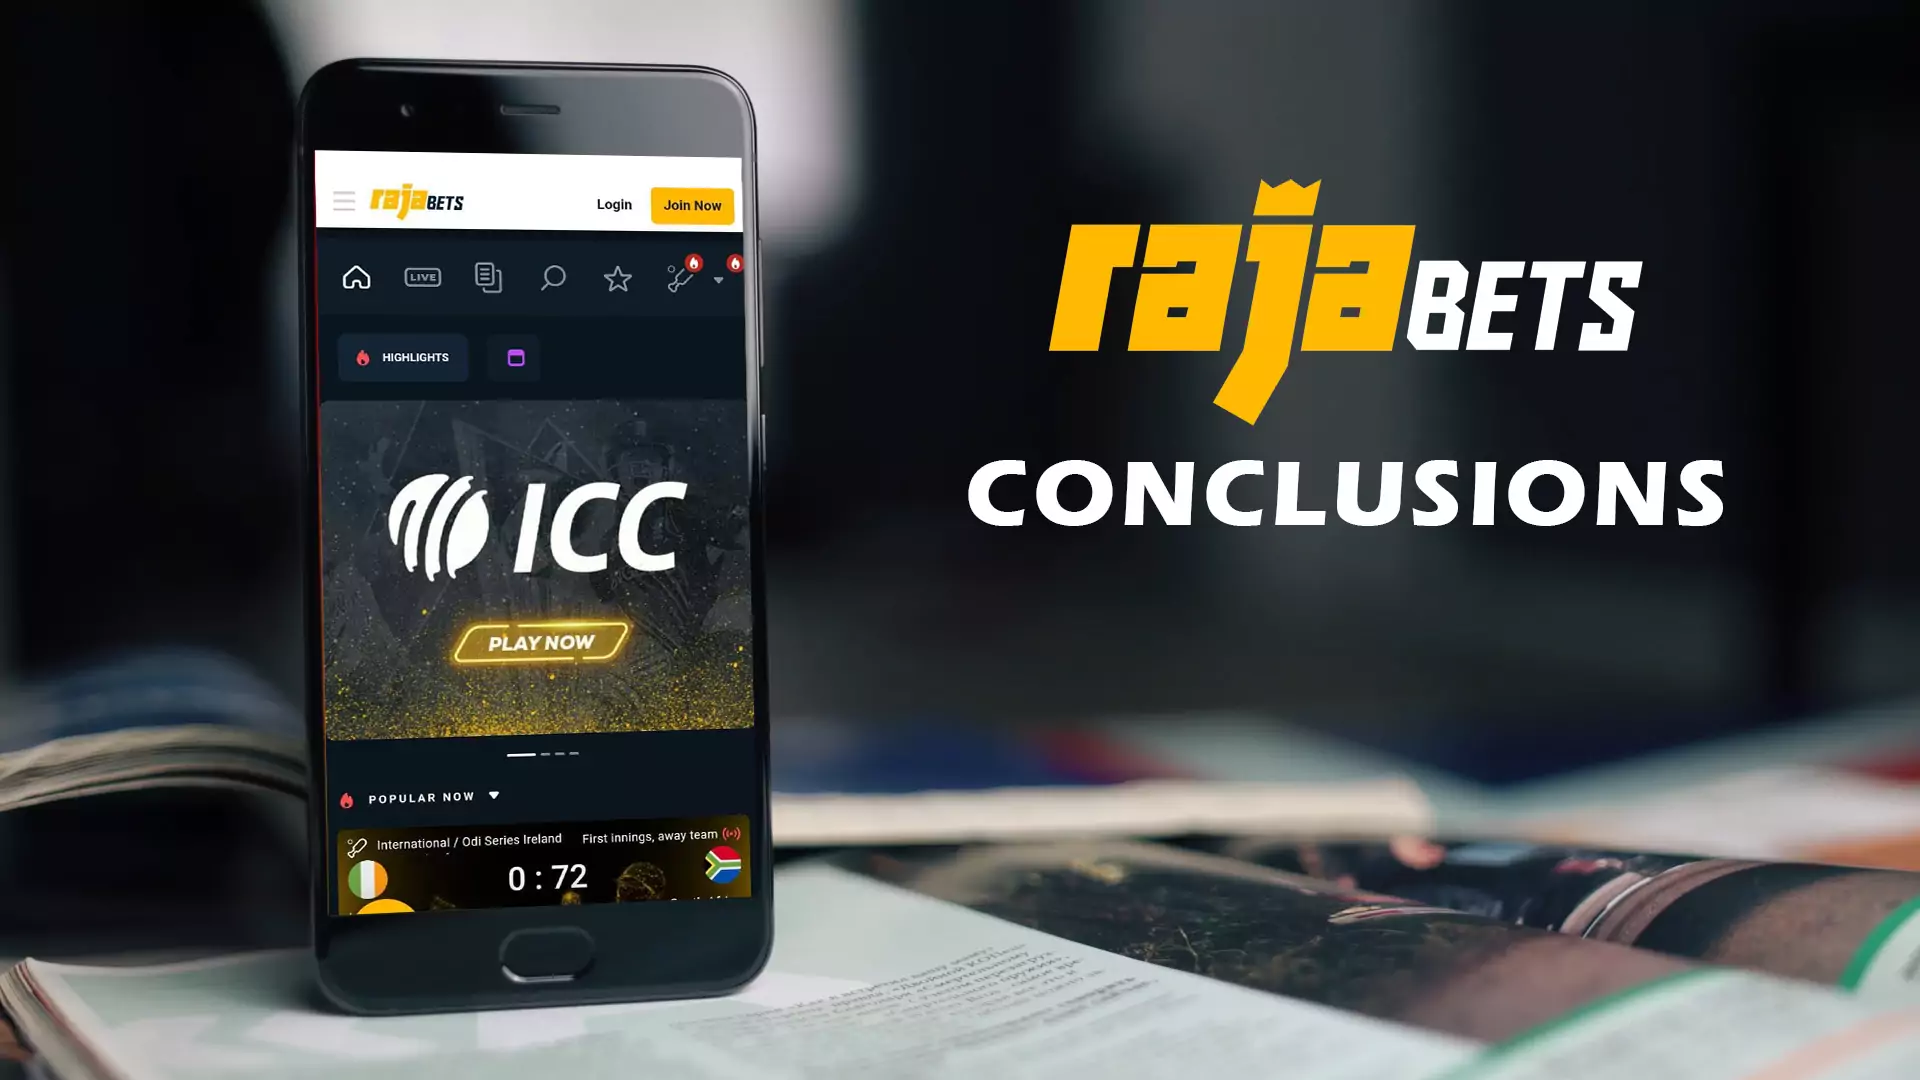 Read about the main benefits of the Rajabets app for Android in our conclusions.